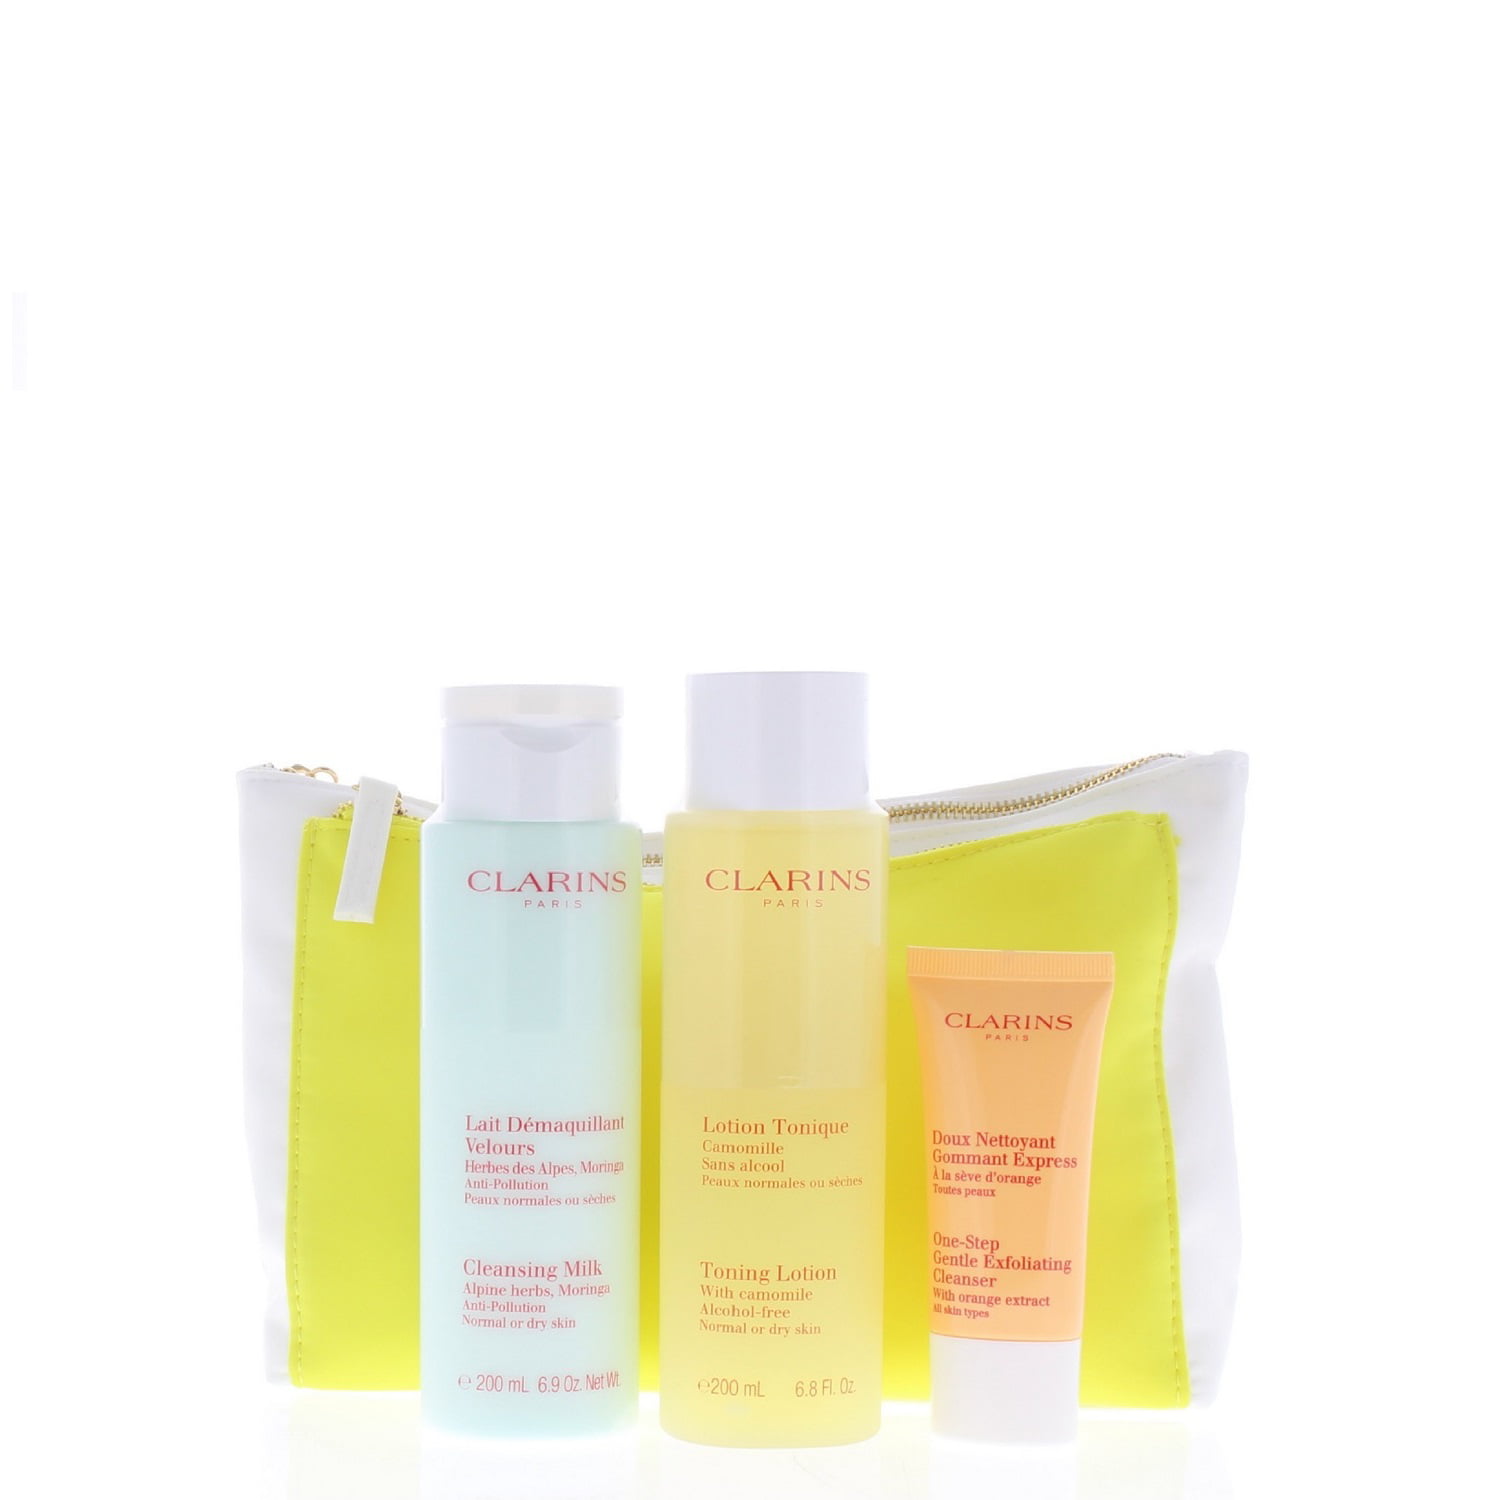 vidnesbyrd Australsk person Thrust Clarins Kit Normal Or Dry Skin (Toning Lotion 200 Ml, Cleansing Milk 200  Ml, Exfoliating Cleanser ) - Walmart.com